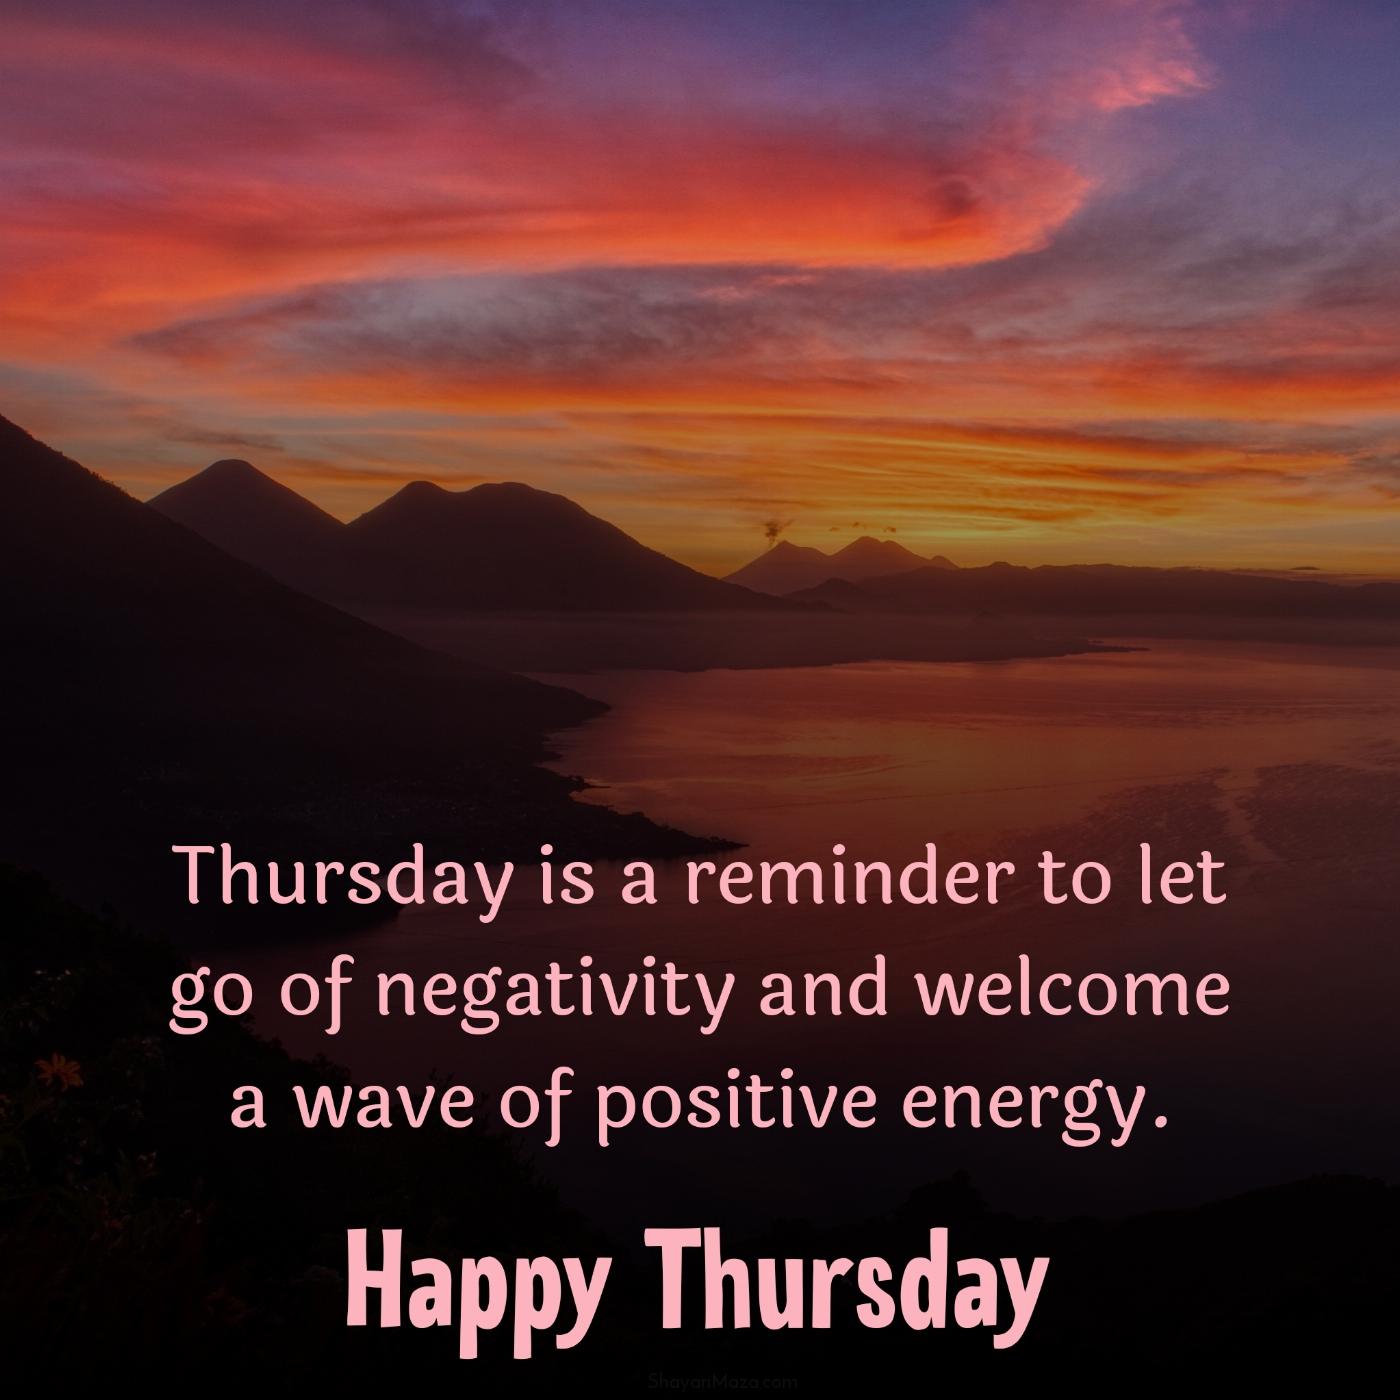 Thursday is a reminder to let go of negativity